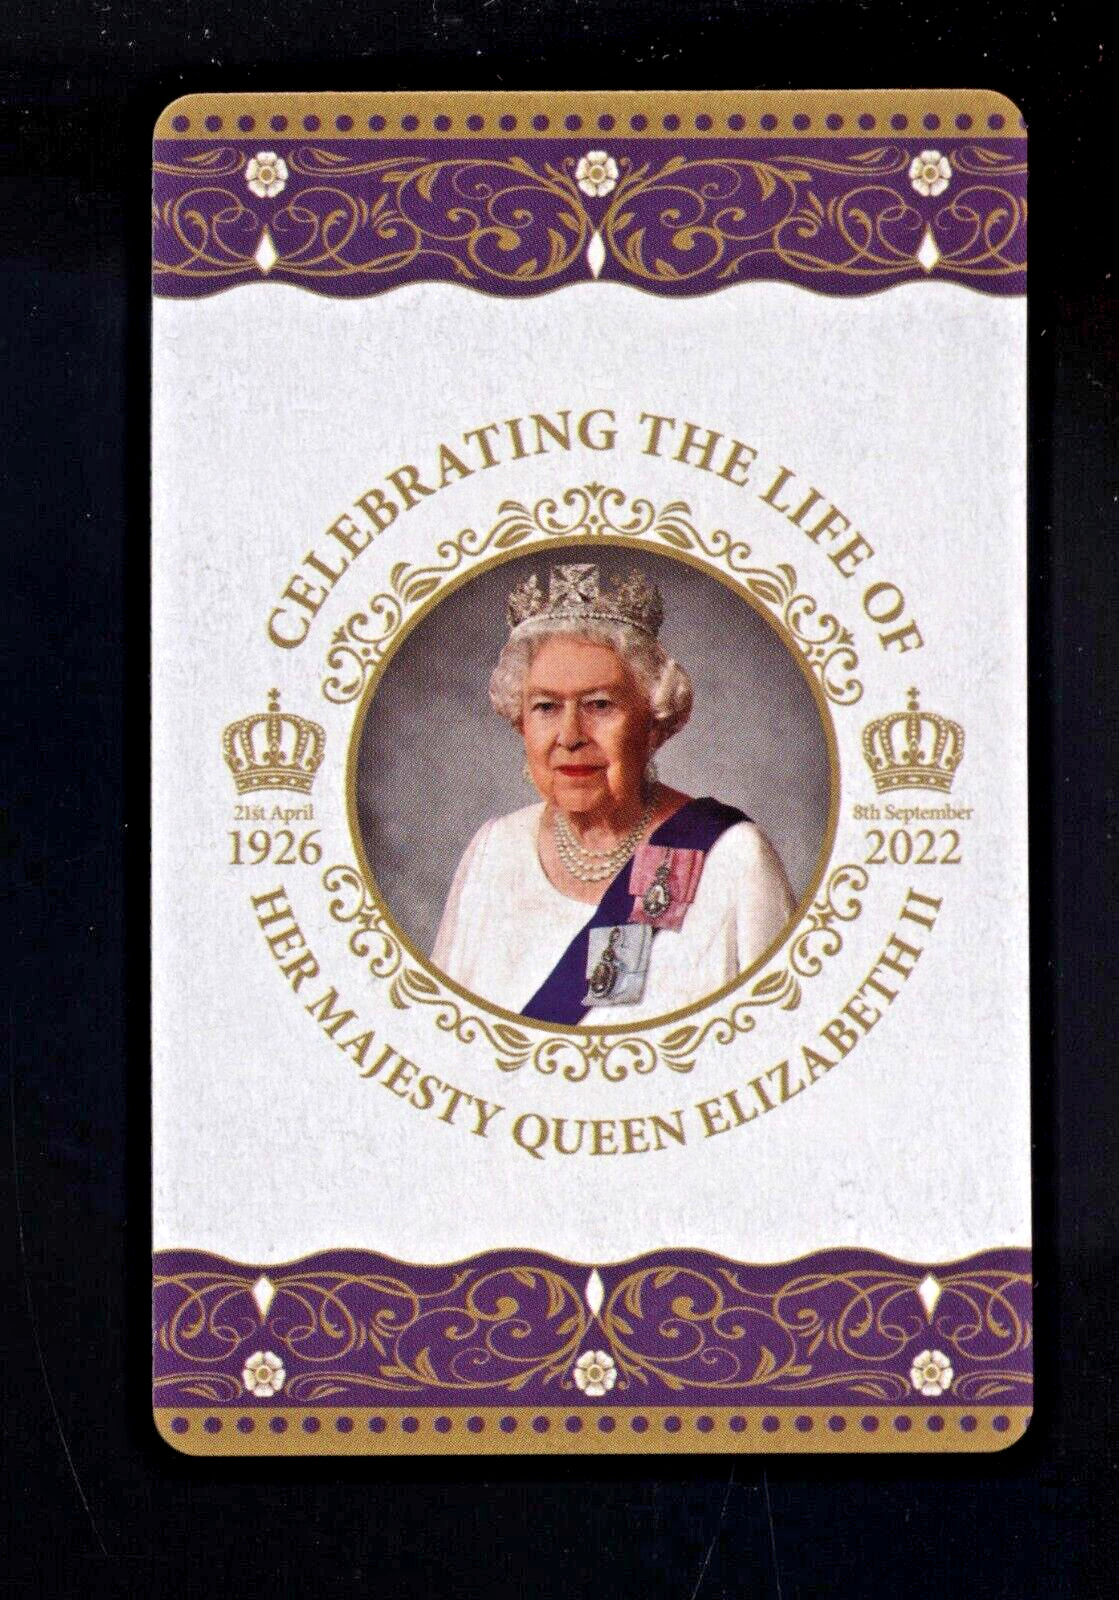 PLAYING CARD CELEBRATING LIFE OF HER MAJESTY QUEEN ELIZABETH SECOND 1926 - 2022